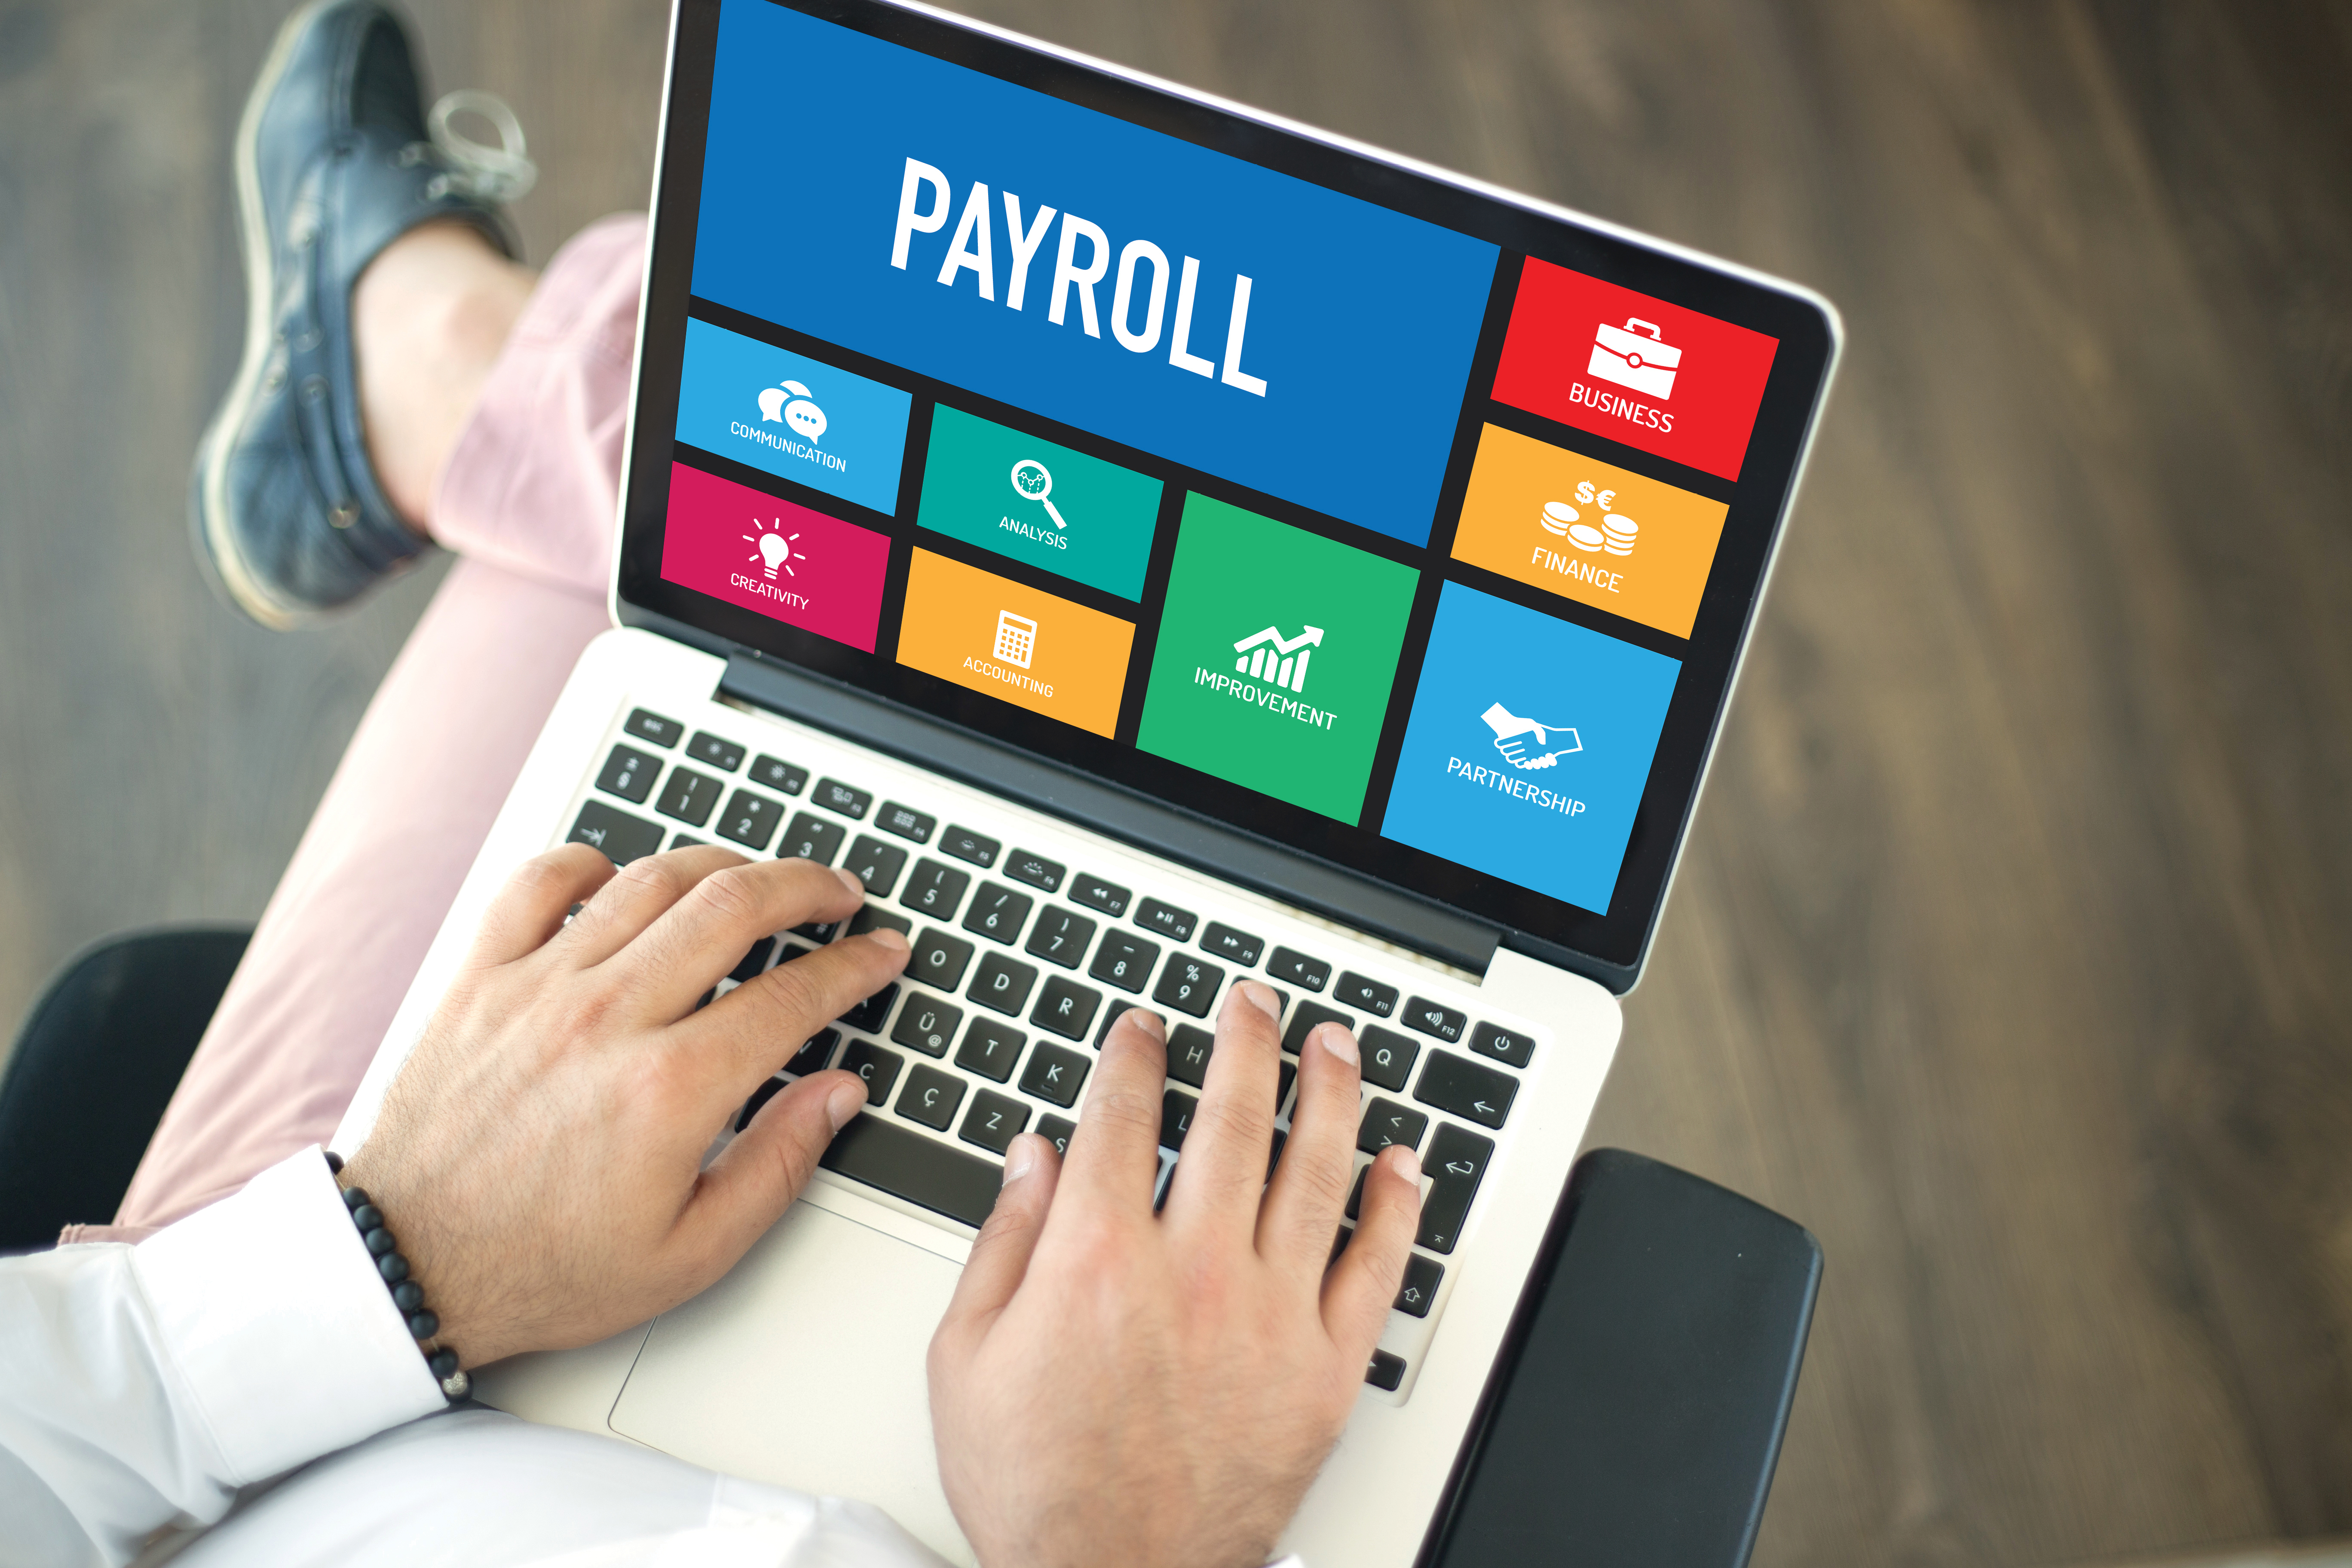 The payroll integration for SAP Business One makes compliance easy